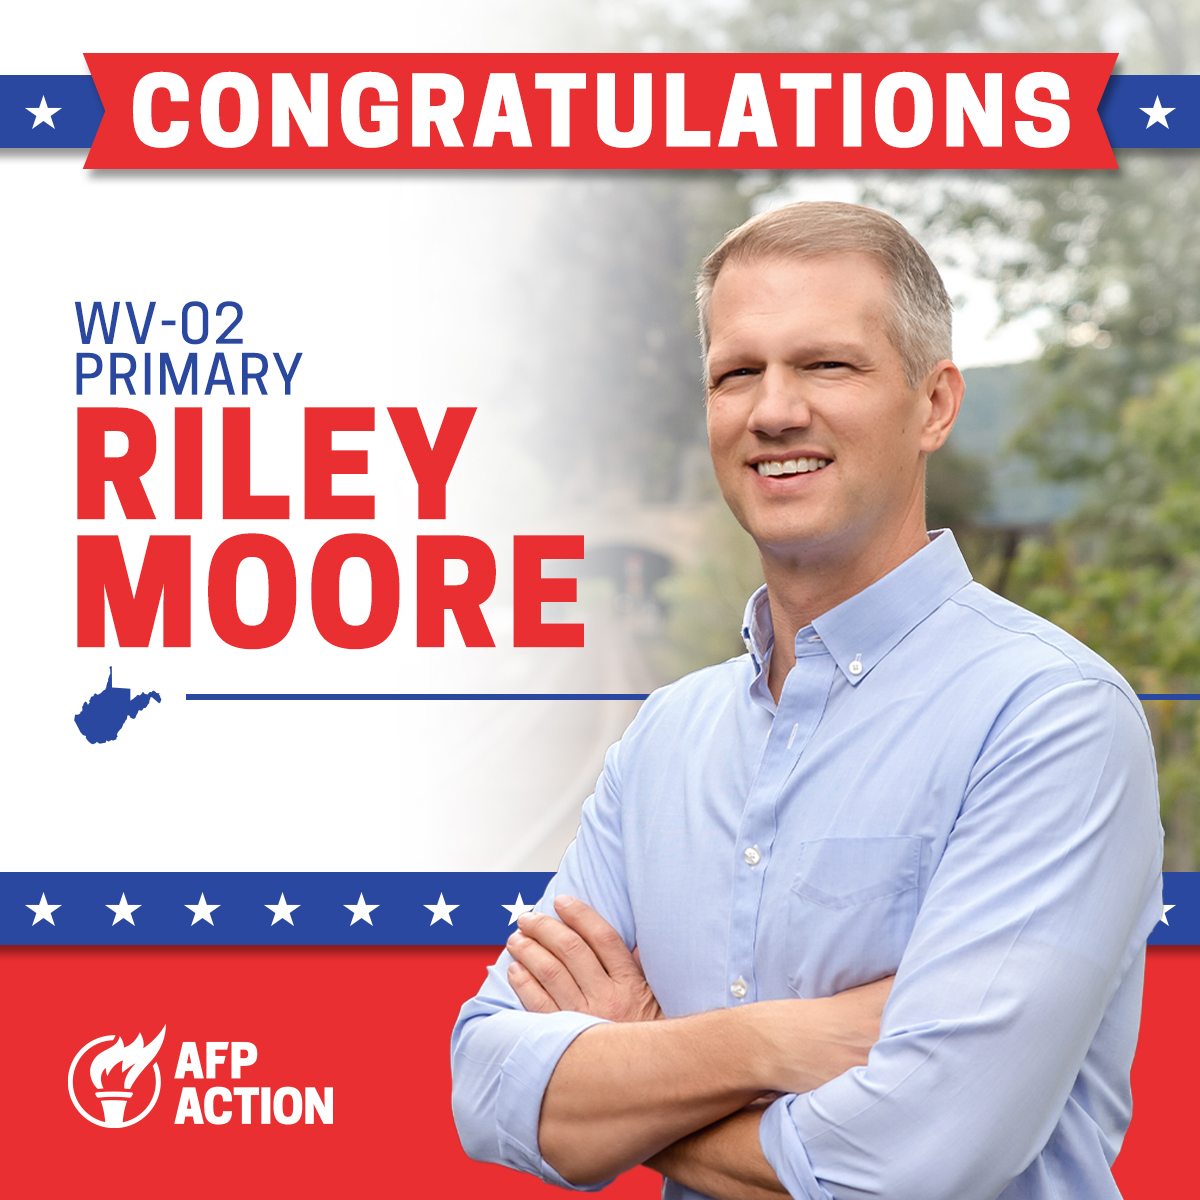 AFP Action congratulates @RileyMooreWV on his successful primary win in WV-02! Riley Moore will bring West Virginia values to Washington. You can count on Riley to fight for pro-growth policies & work to secure the border in Congress.